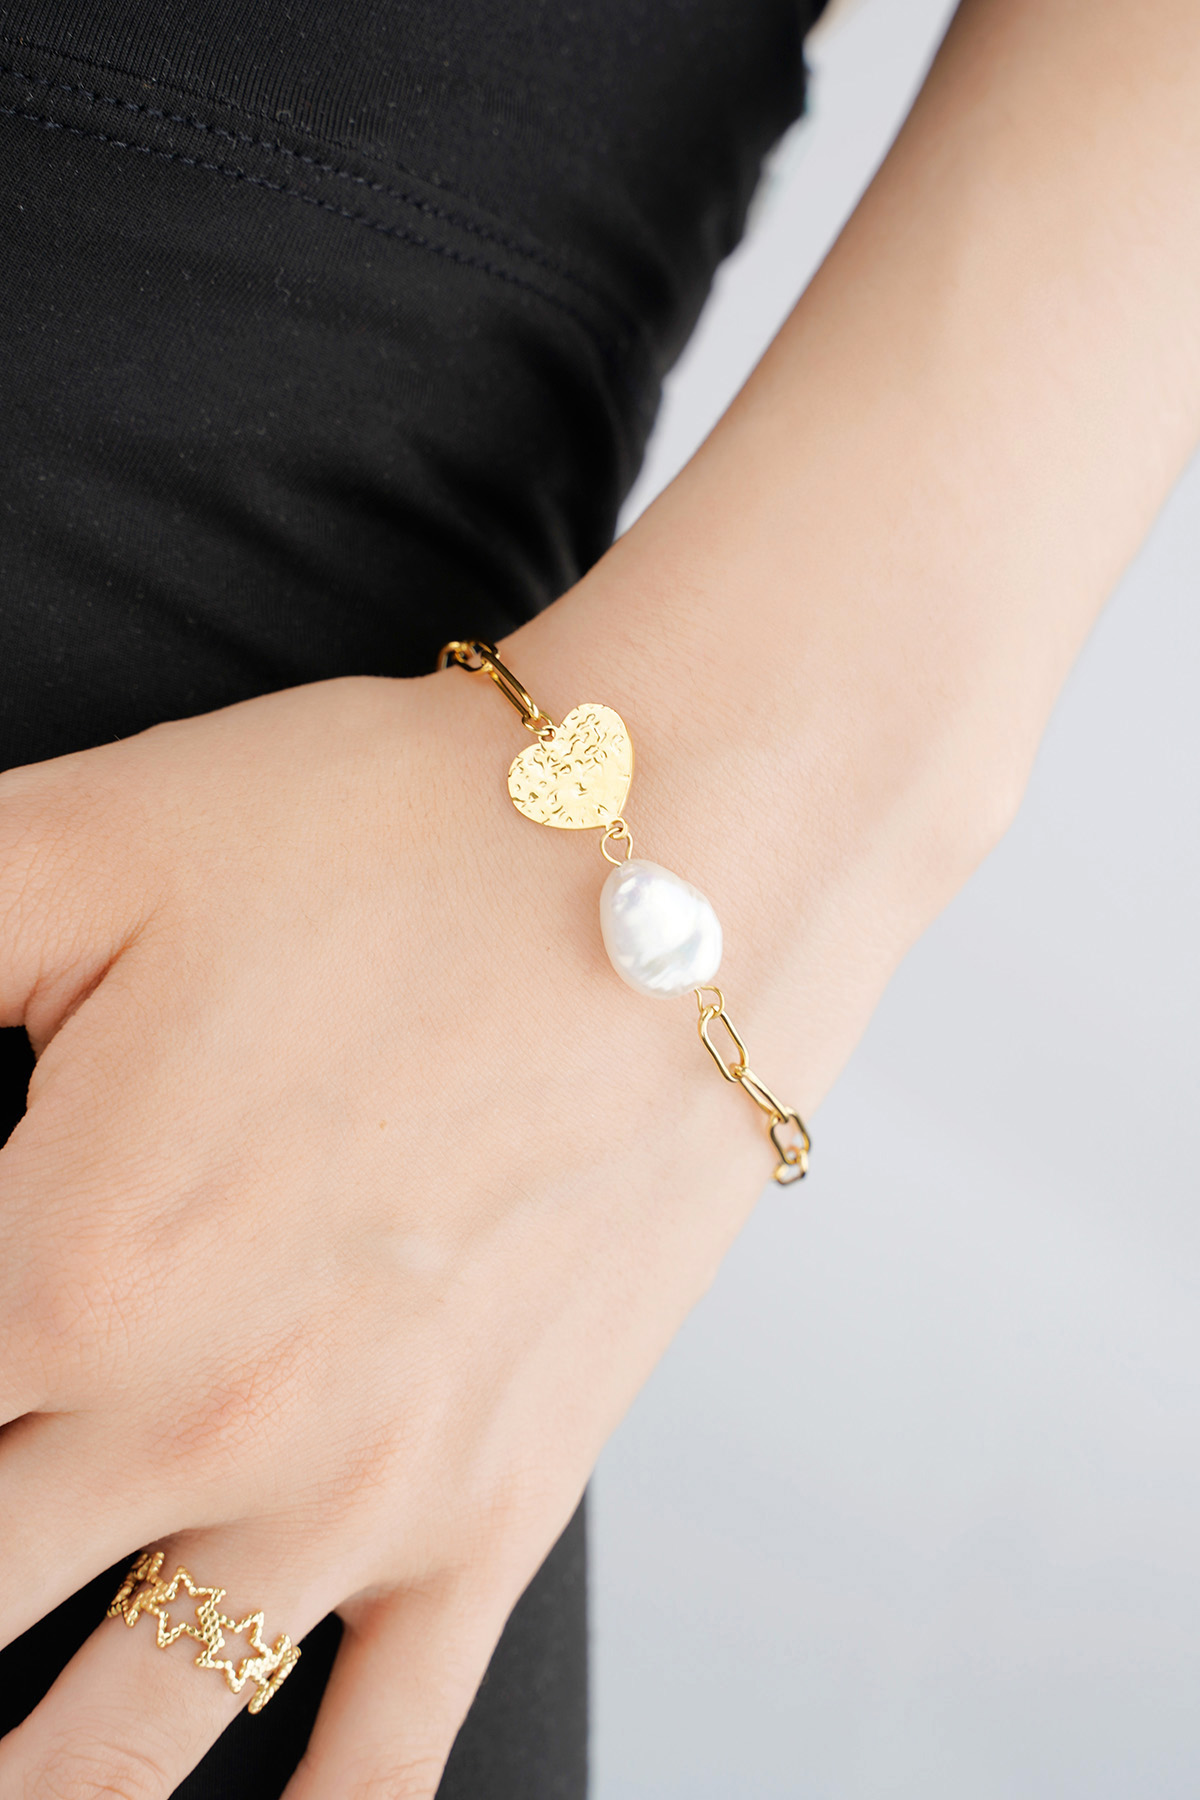 Bracelet amour toujours - gold h5 Picture3